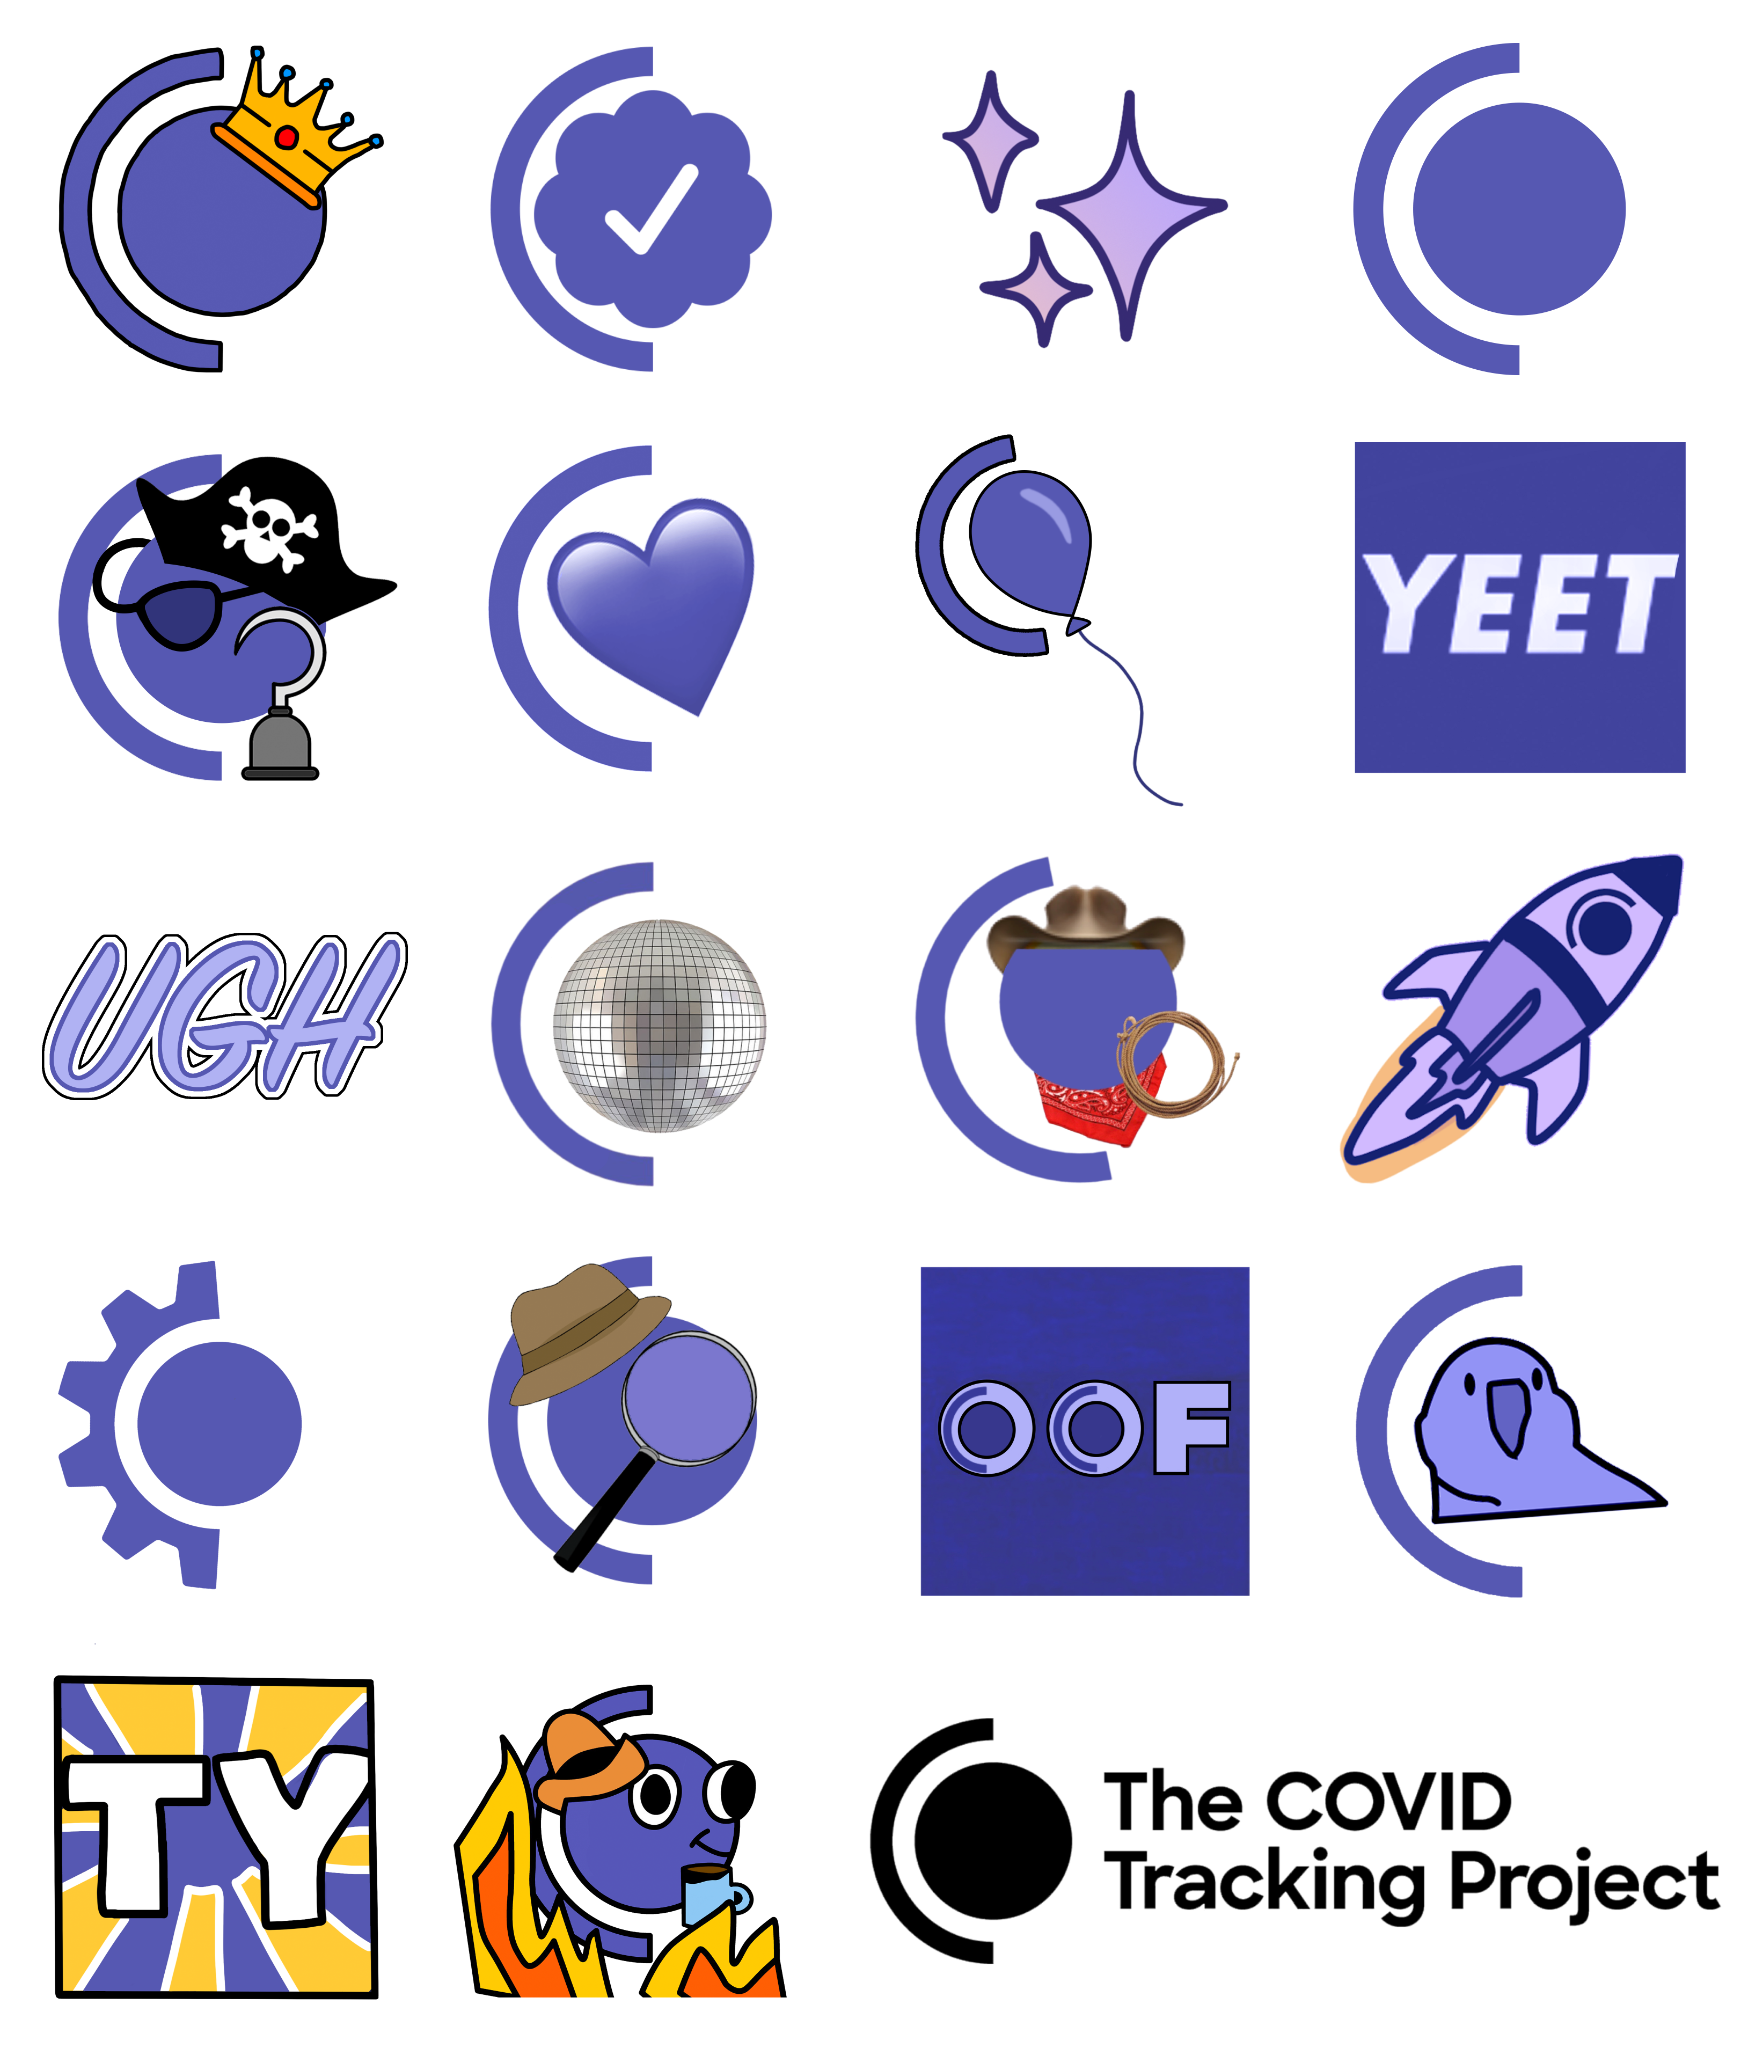 A panel showing 19 images based on the COVID Tracking Project Logo, a purple semi-circle or C enclosing a solid purple circle. Samples include a logo with a crown, a logo with a cowboy hat, a logo with a pirate eyepatch and hook, and a logo with the central circle replaced by a heart.